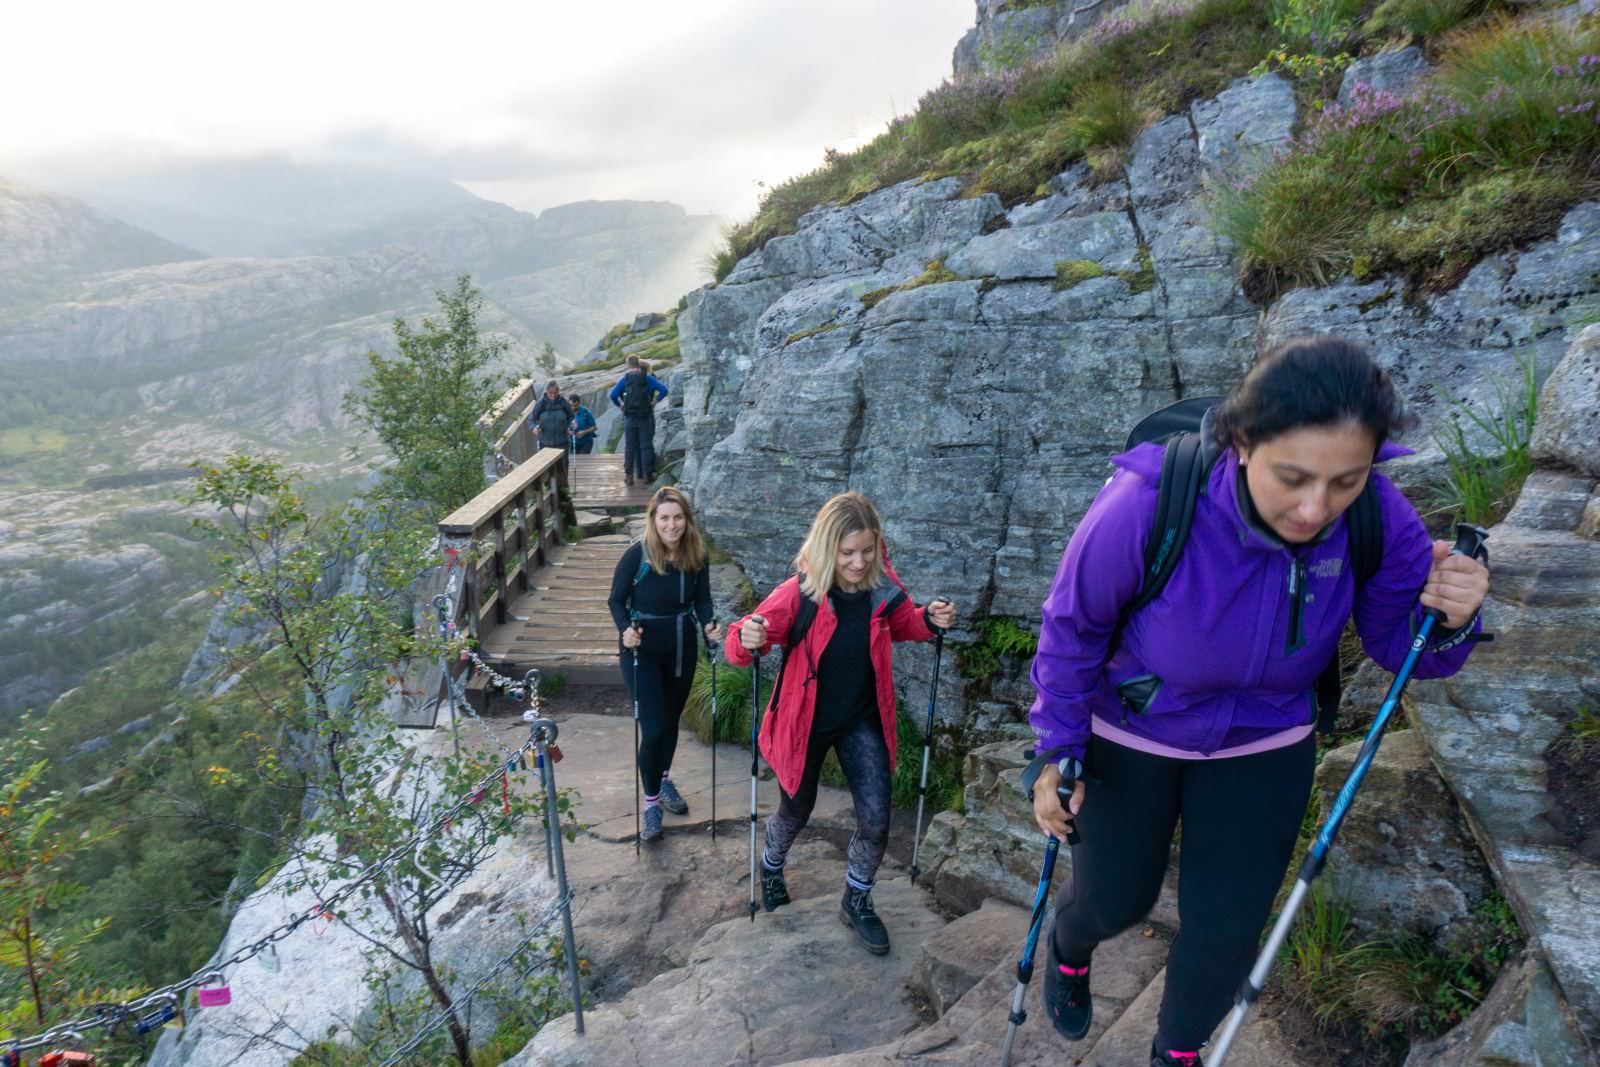 How to See Preikestolen Without the Crowds